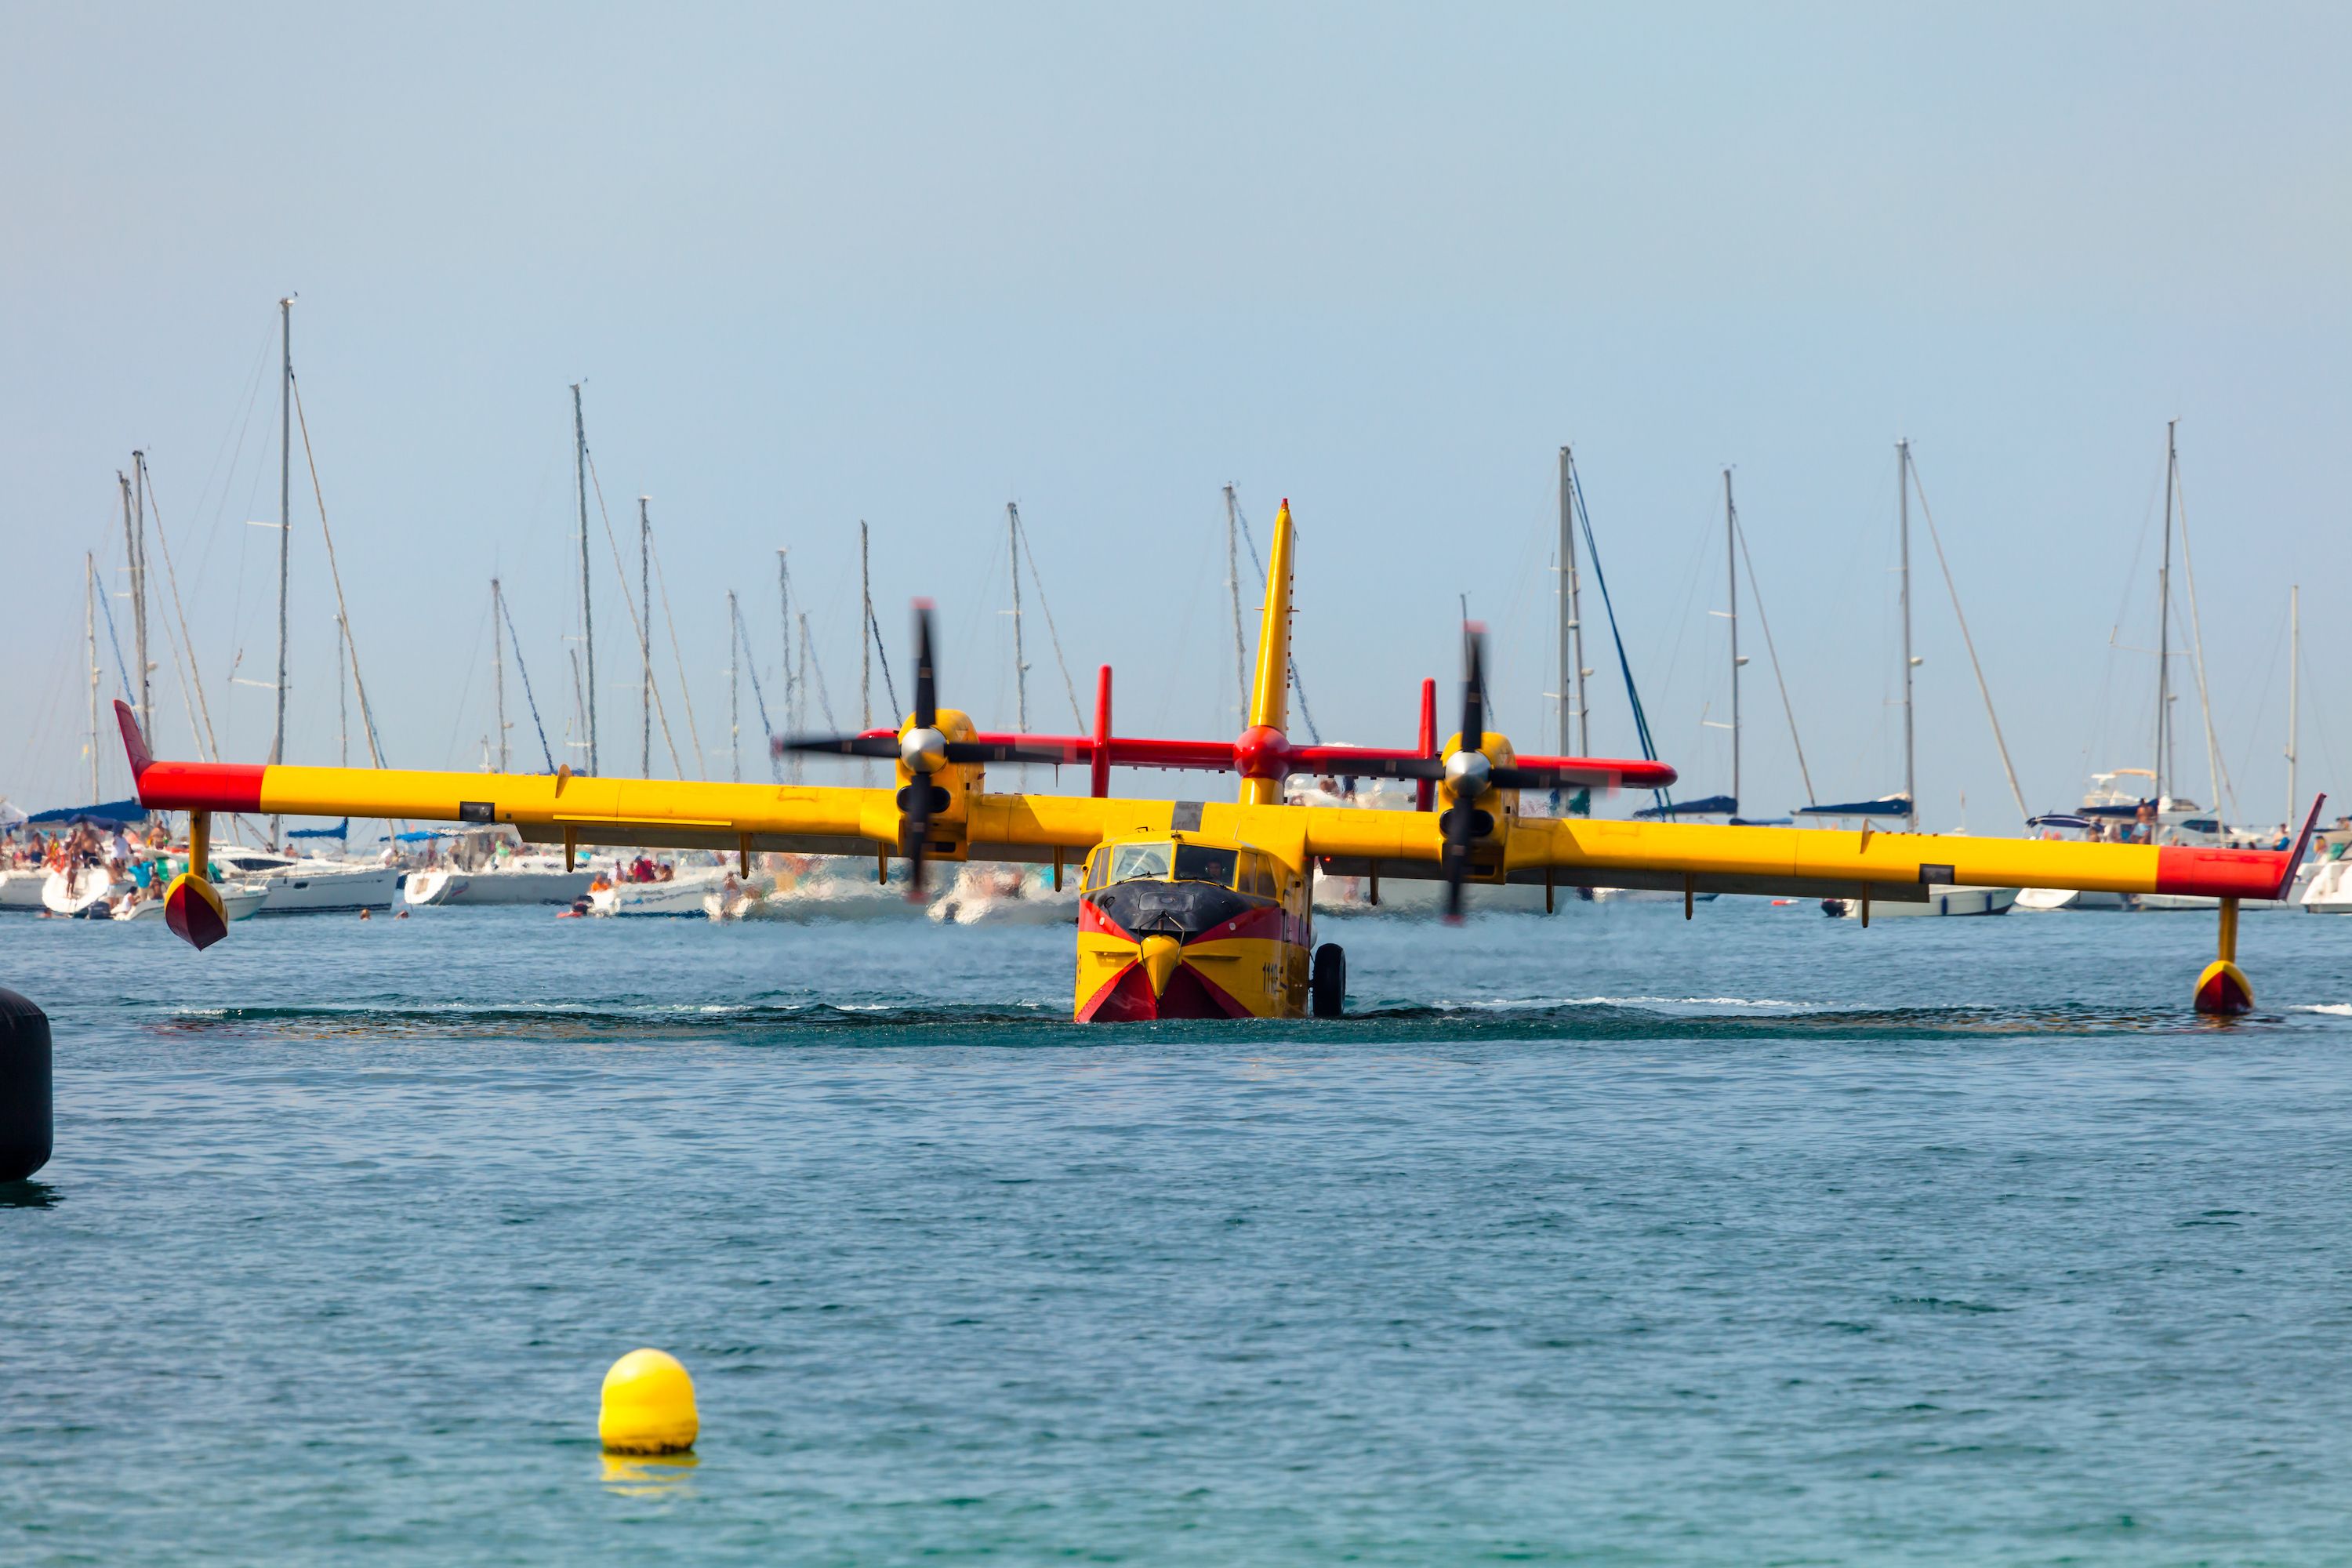 Canadair CL-215 in water